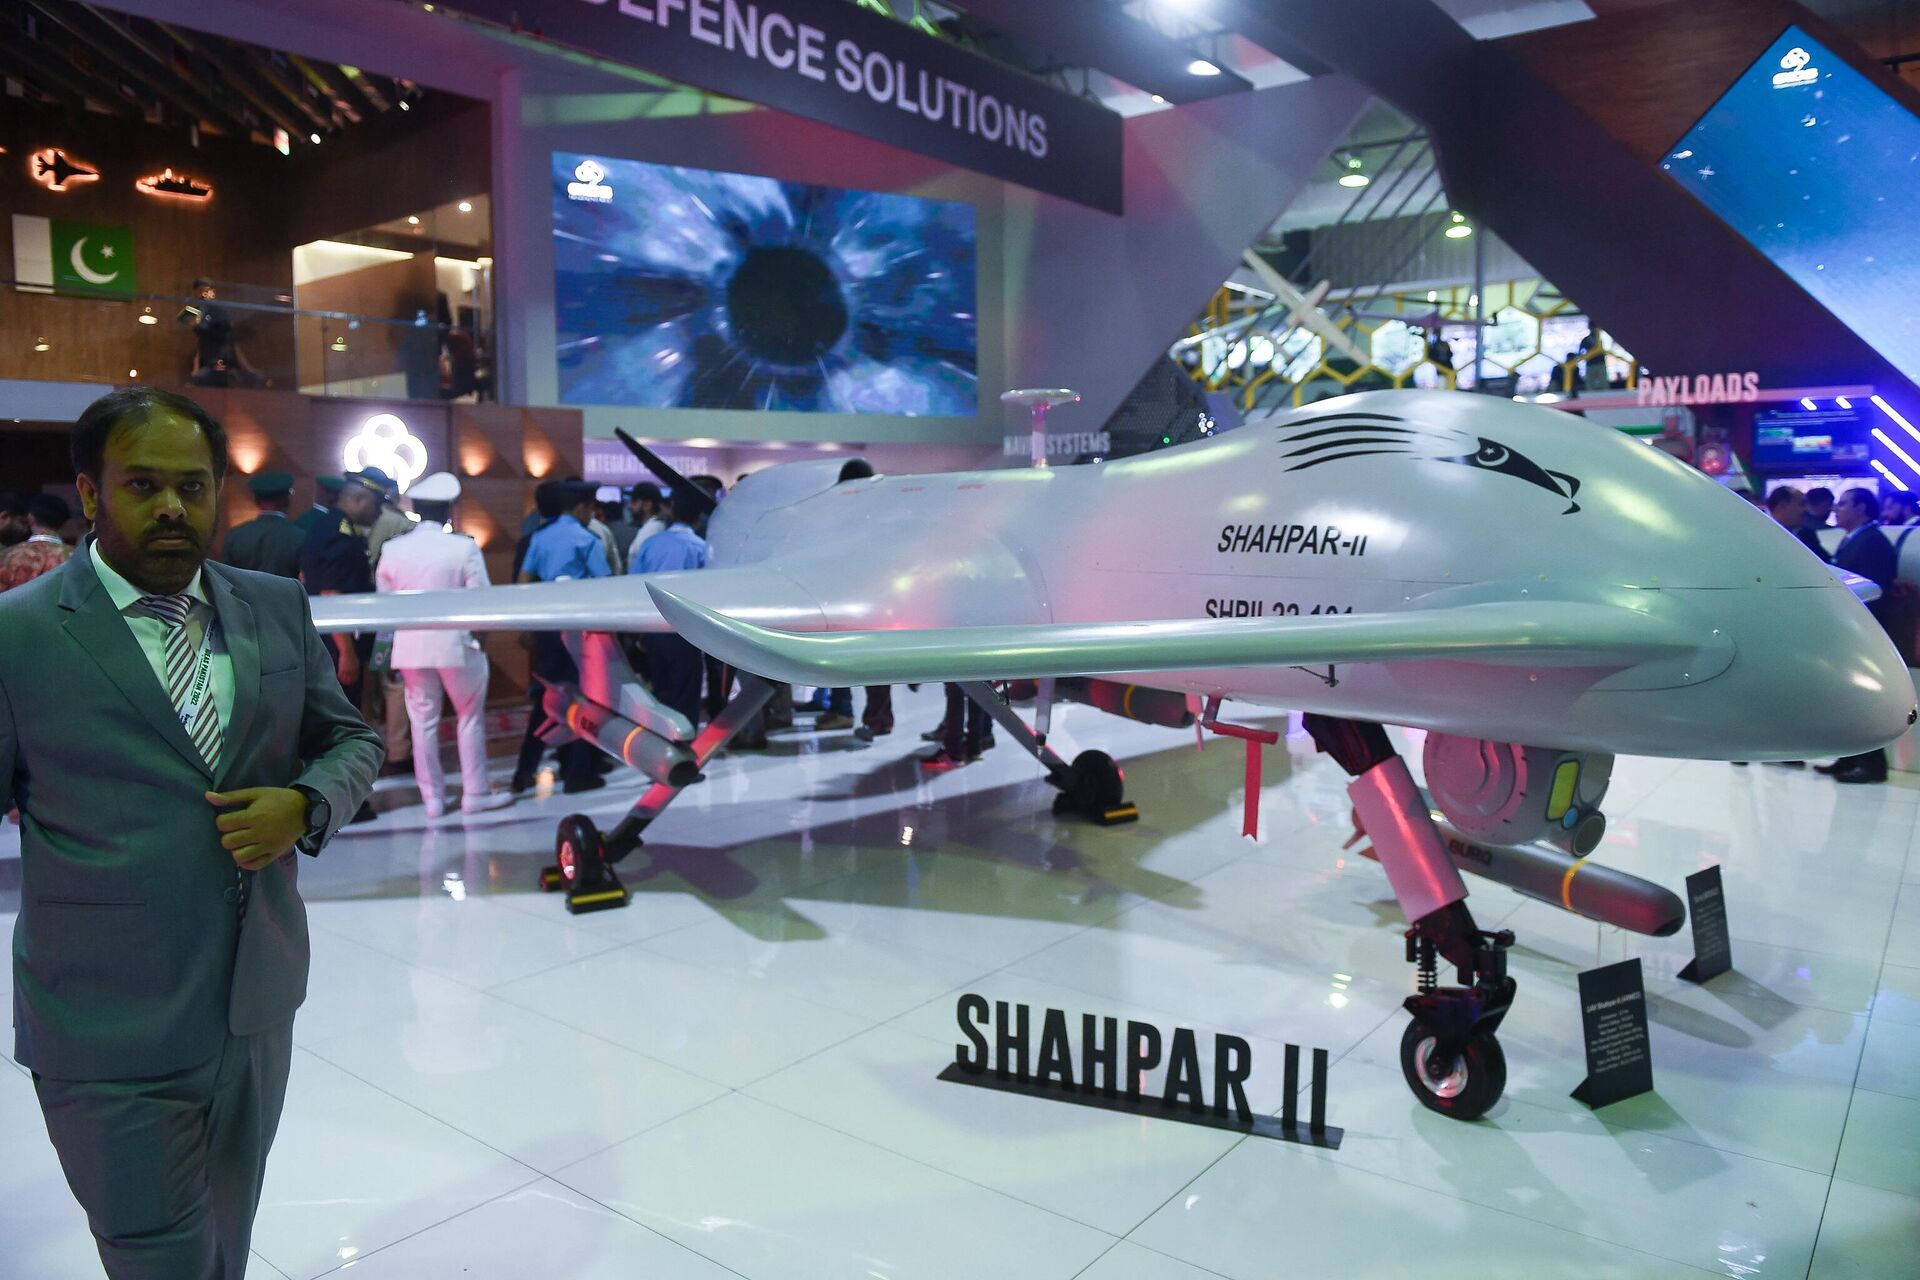 Military officials walk past a Pakistan’s unmanned combat aerial vehicle Shahpar-II during International Defence Exhibition and Seminar (IDEAS) 2022 at the Expo Centre in Karachi on November 16, 2022. - Sputnik International, 1920, 16.11.2022